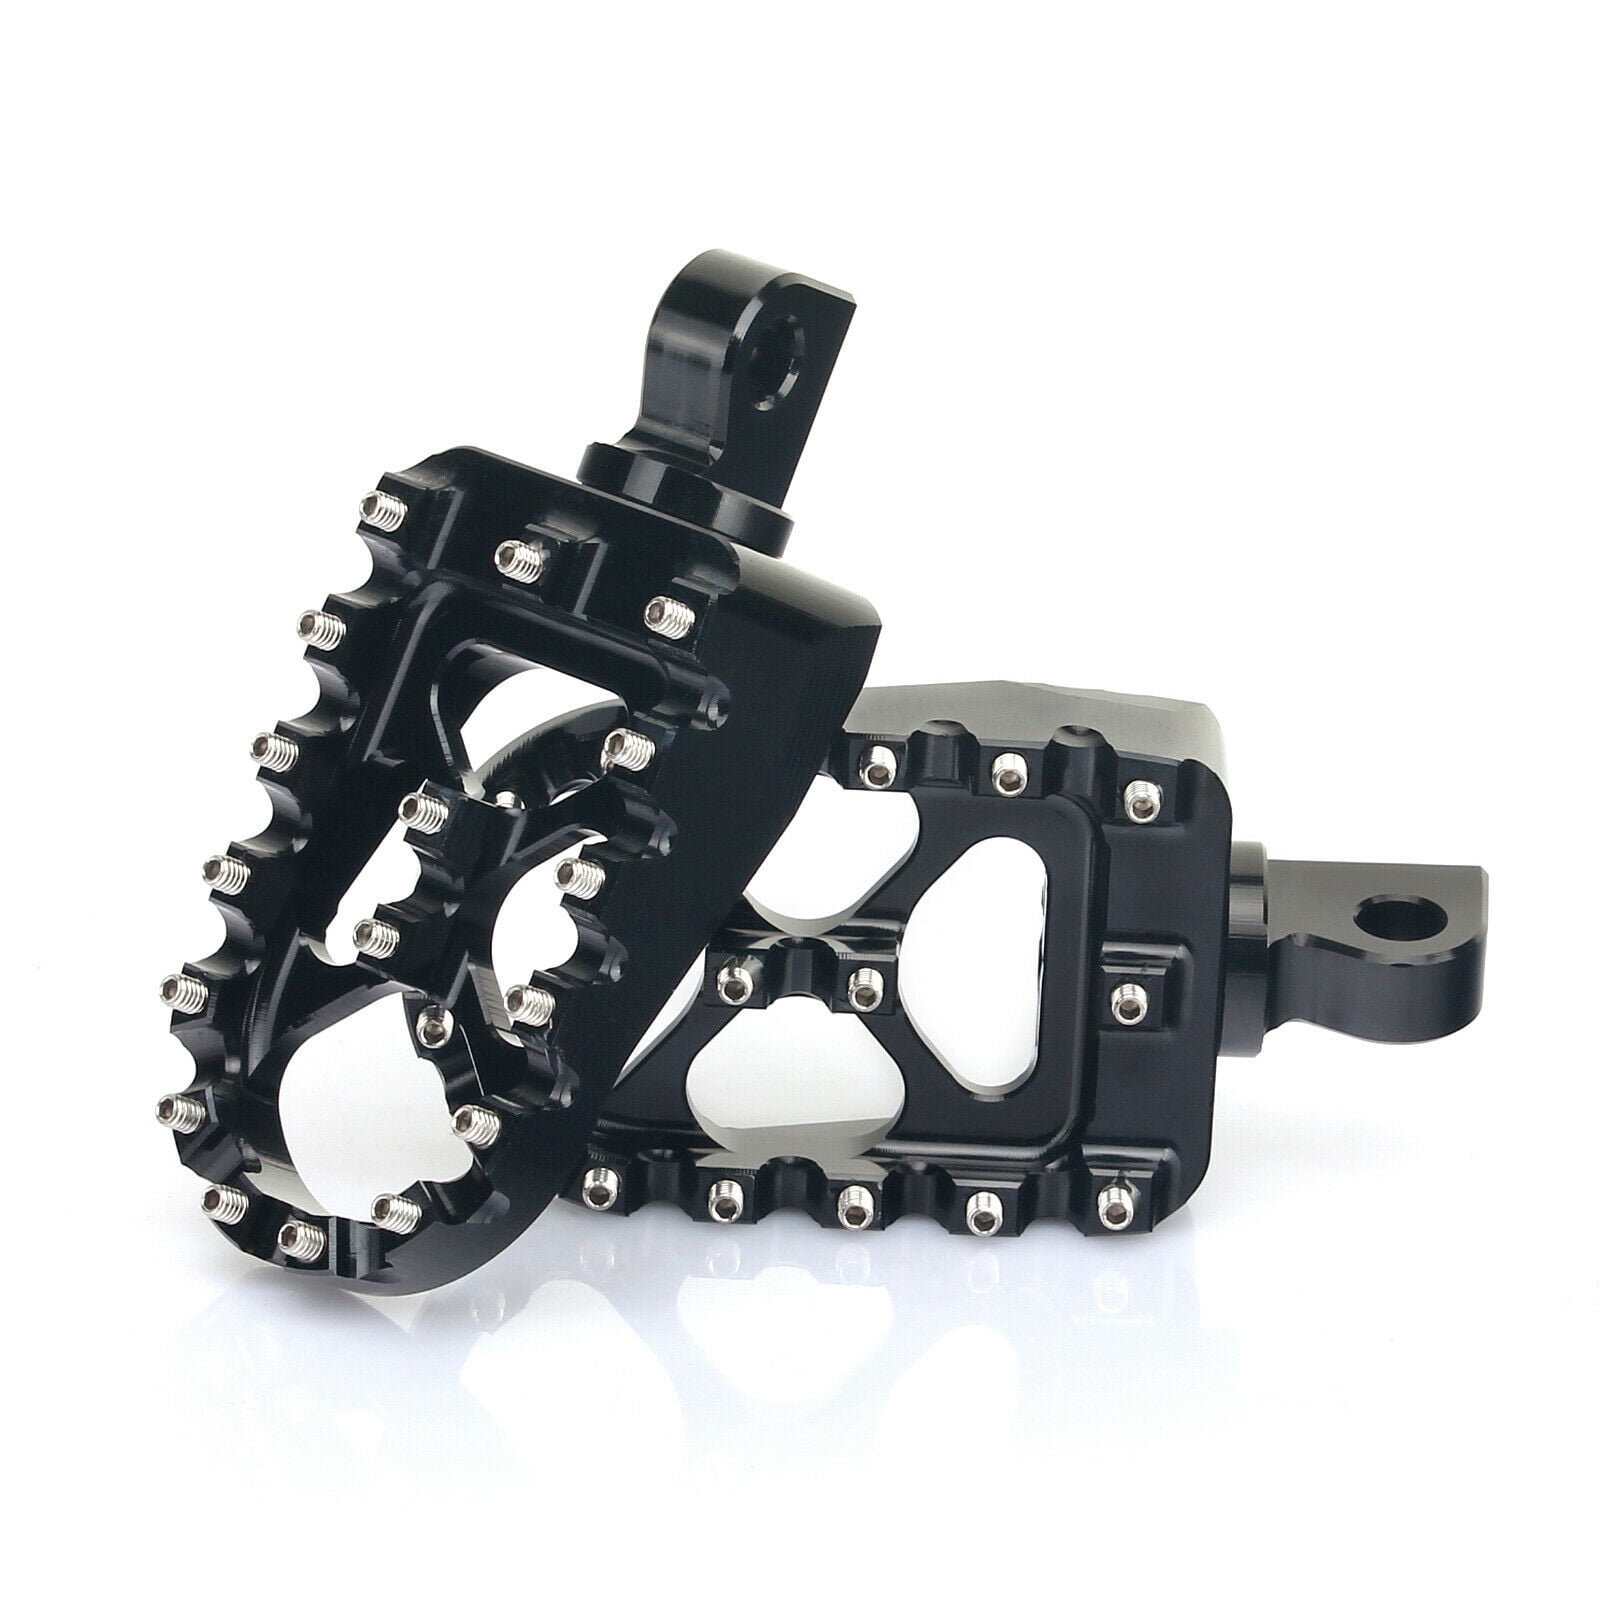 MX Style Wide Fat Footpegs Foot Pegs for Harley Dyna FXD FXDB